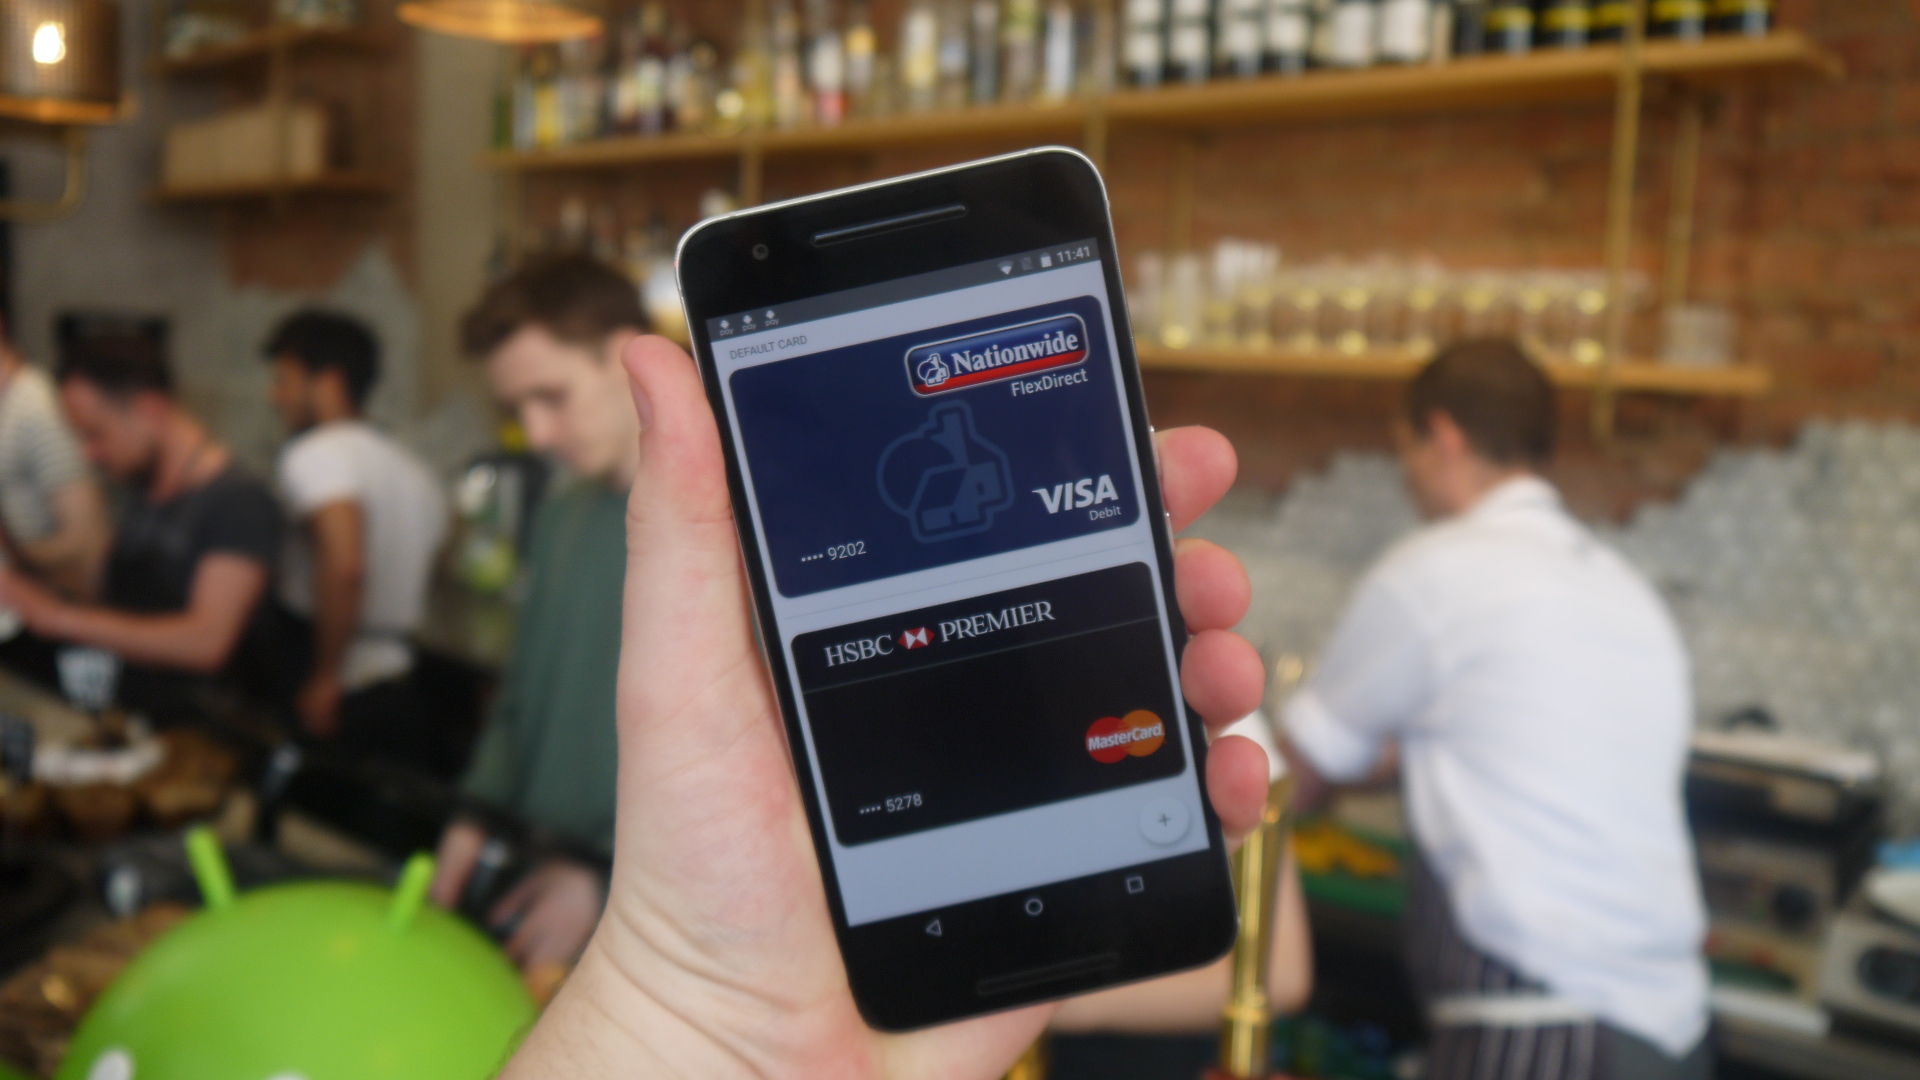 android-pay-will-give-you-free-coffee-and-london-travel-next-month